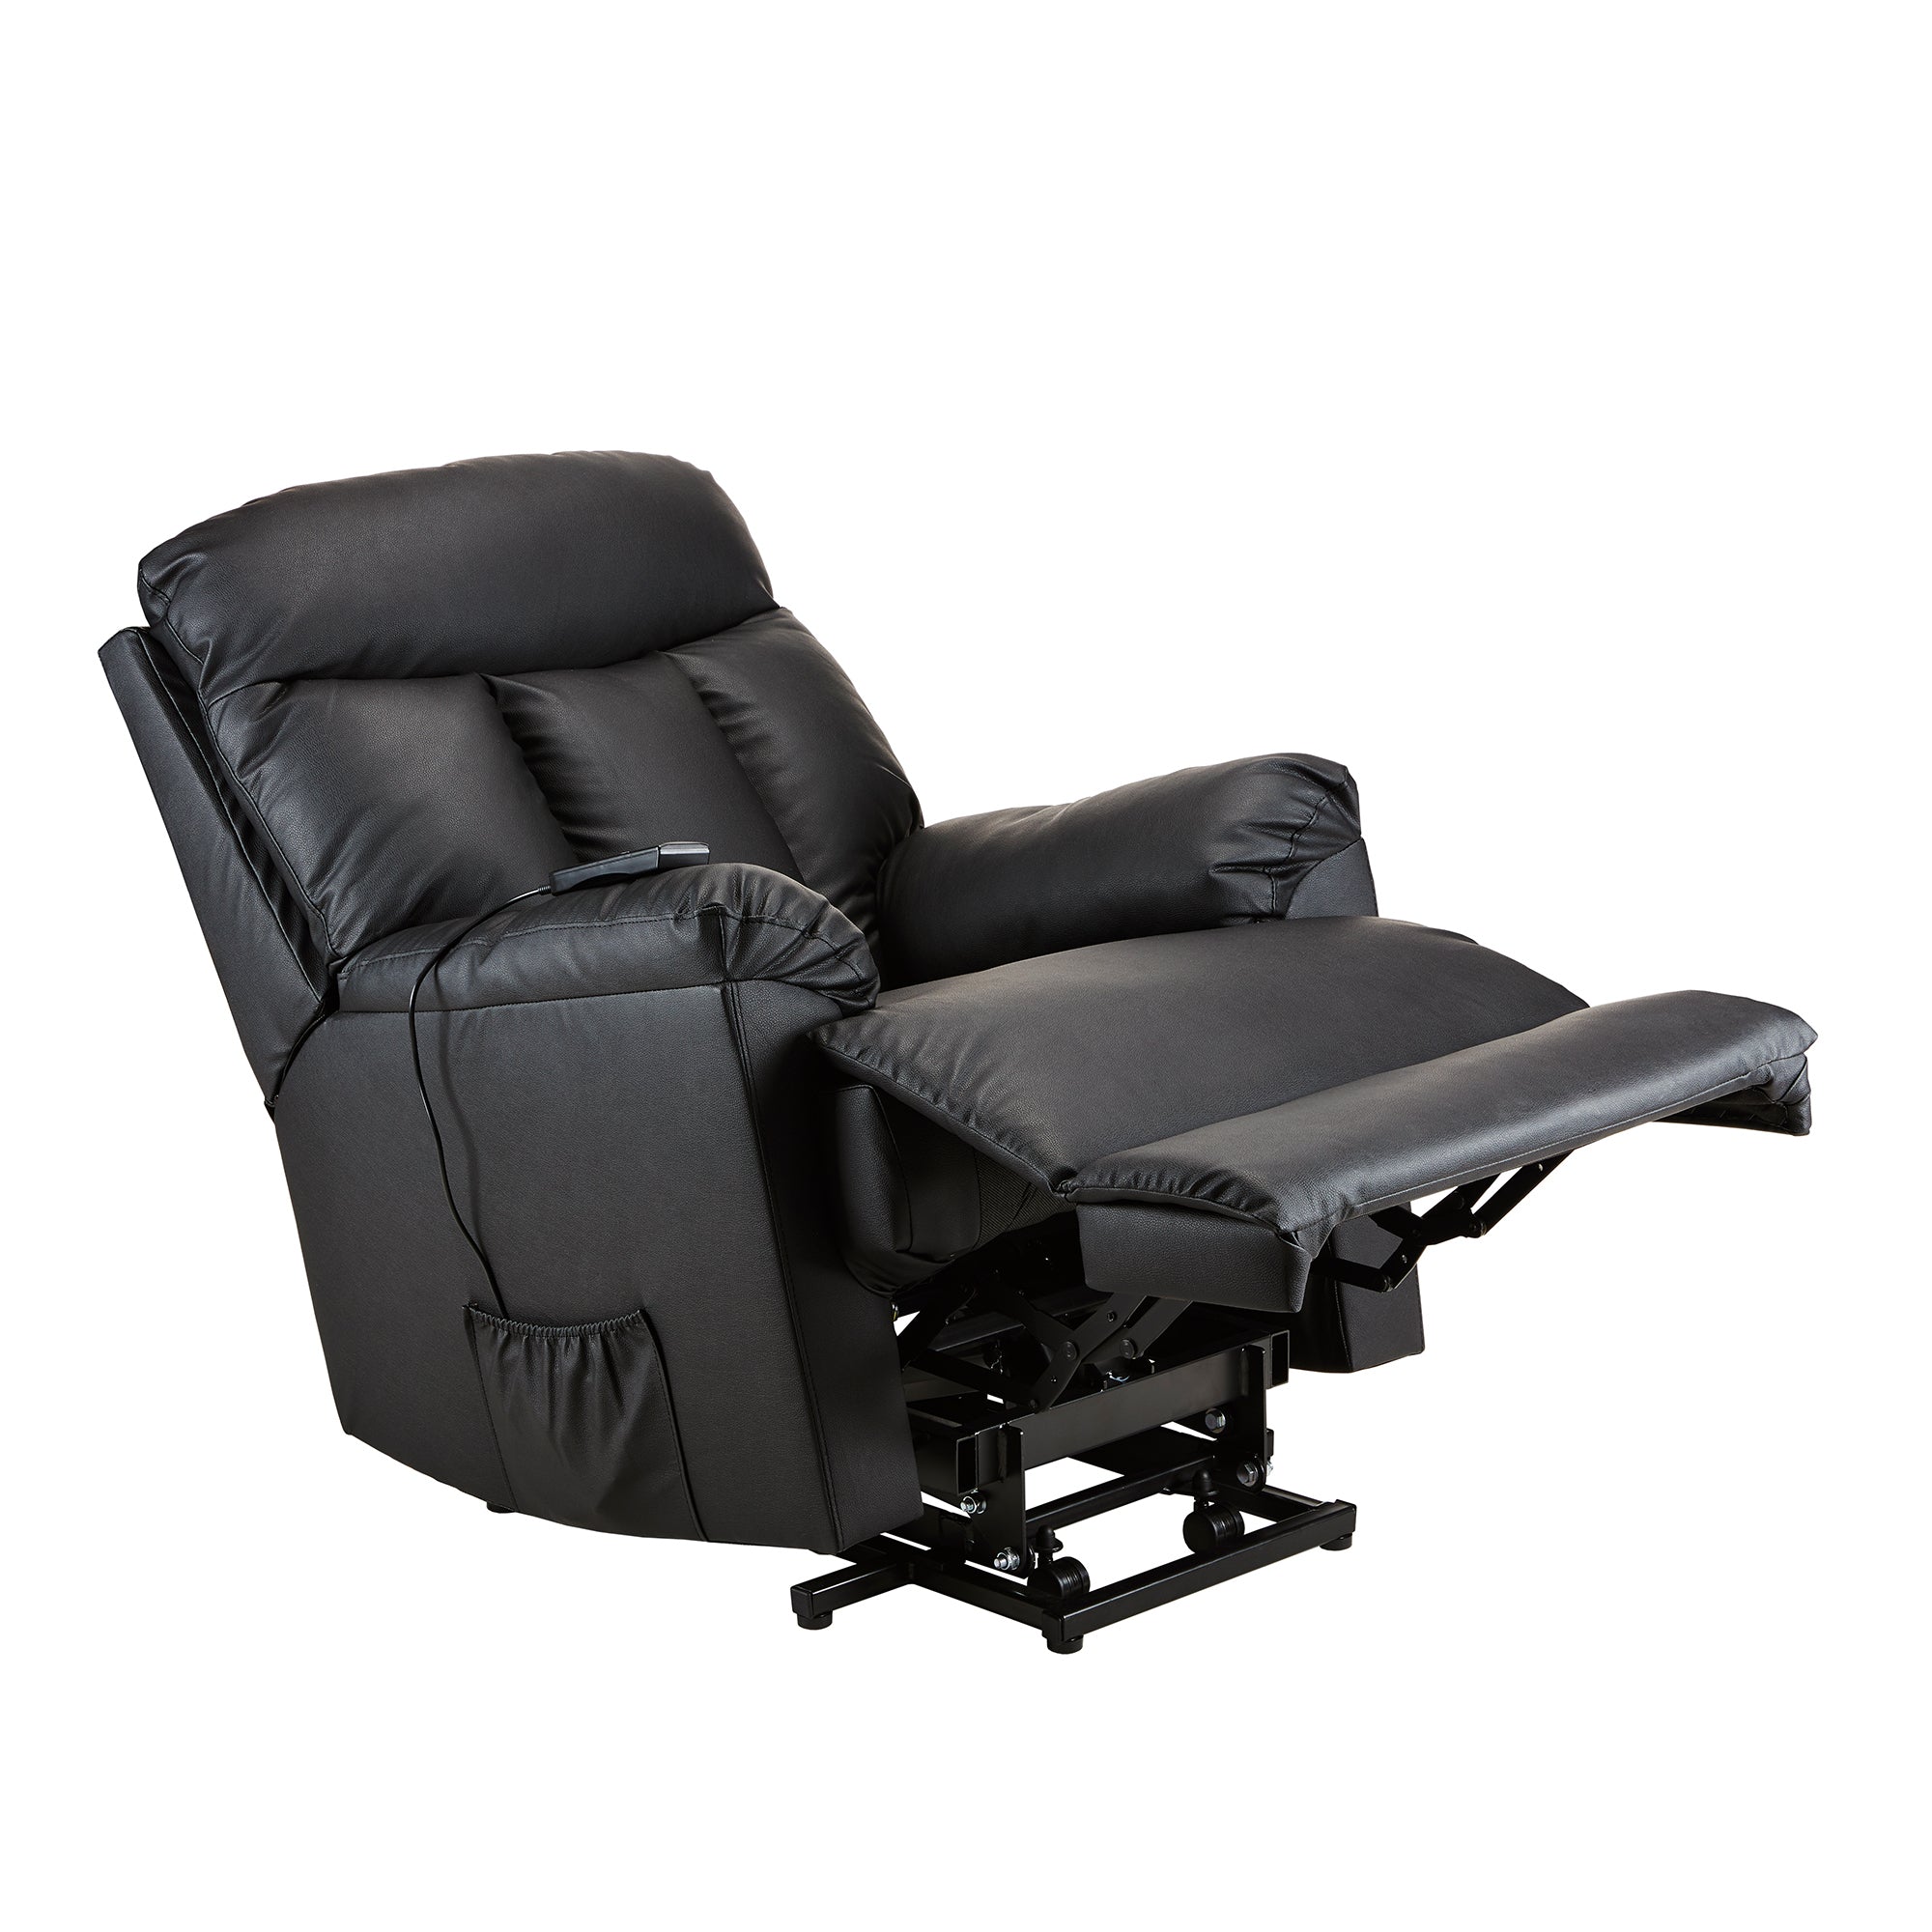 Oliver Chair Lift and Electric PU Leather